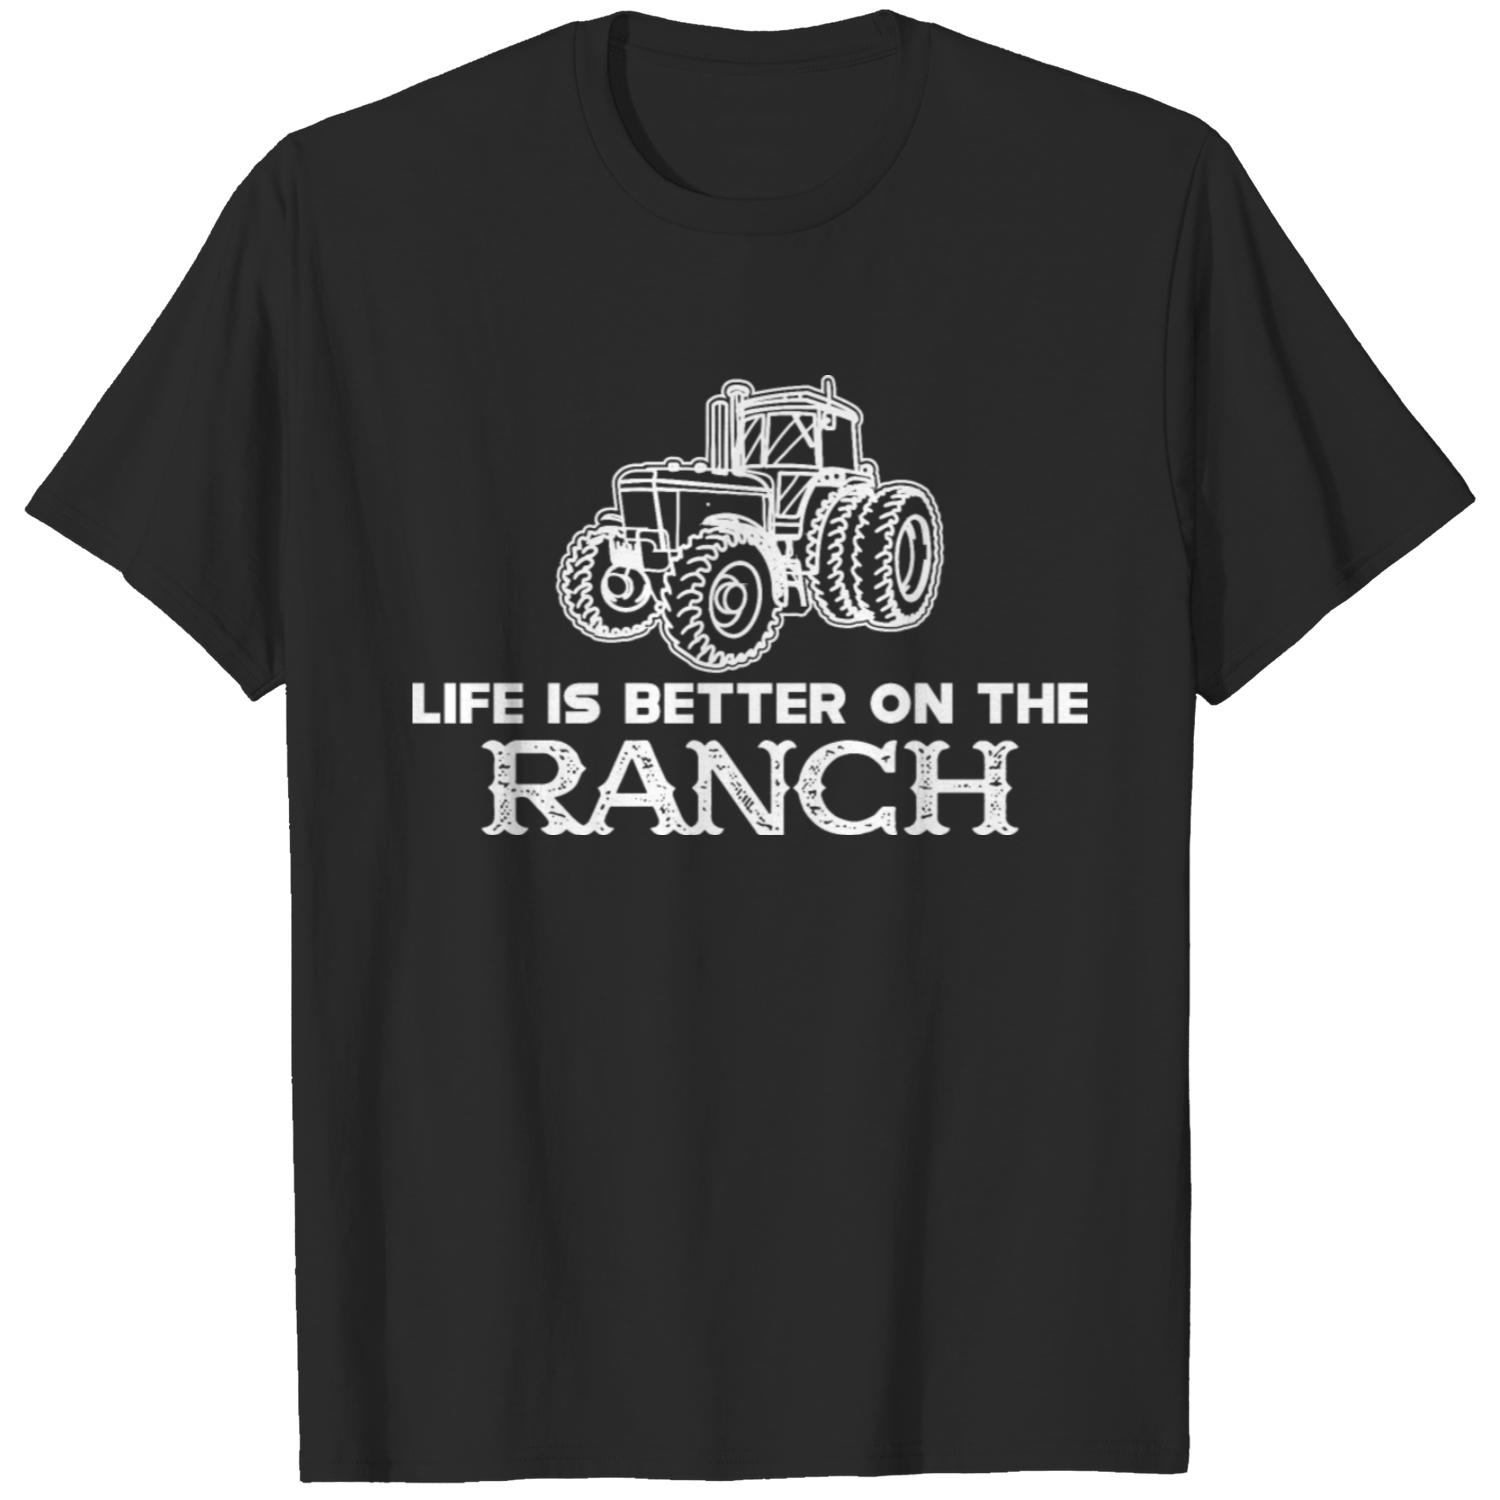 Ranch - Life is better on the ranch T-shirt